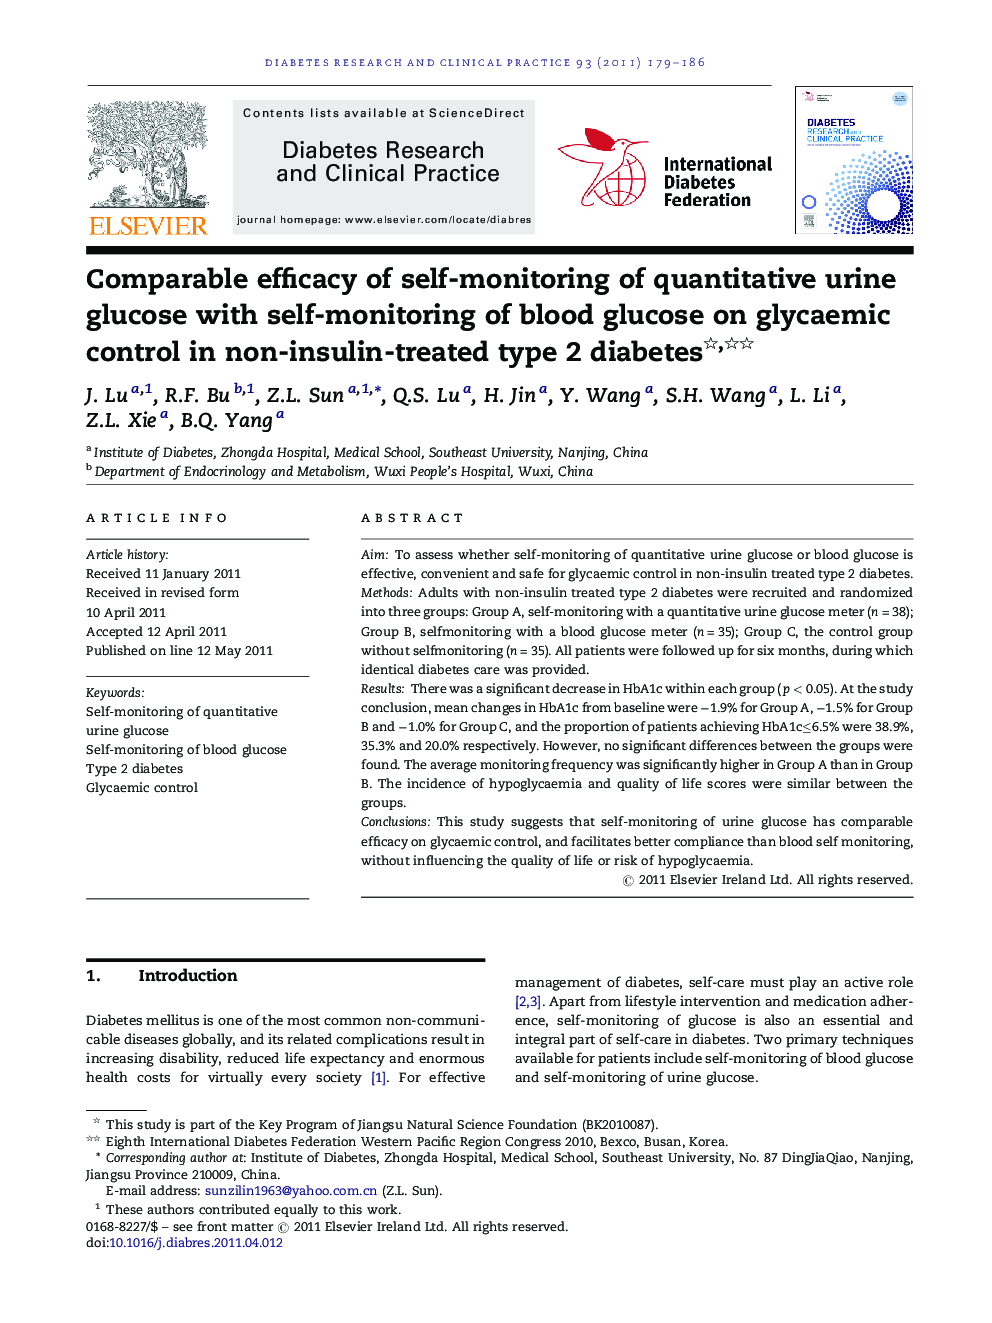 Comparable efficacy of self-monitoring of quantitative urine glucose with self-monitoring of blood glucose on glycaemic control in non-insulin-treated type 2 diabetes 